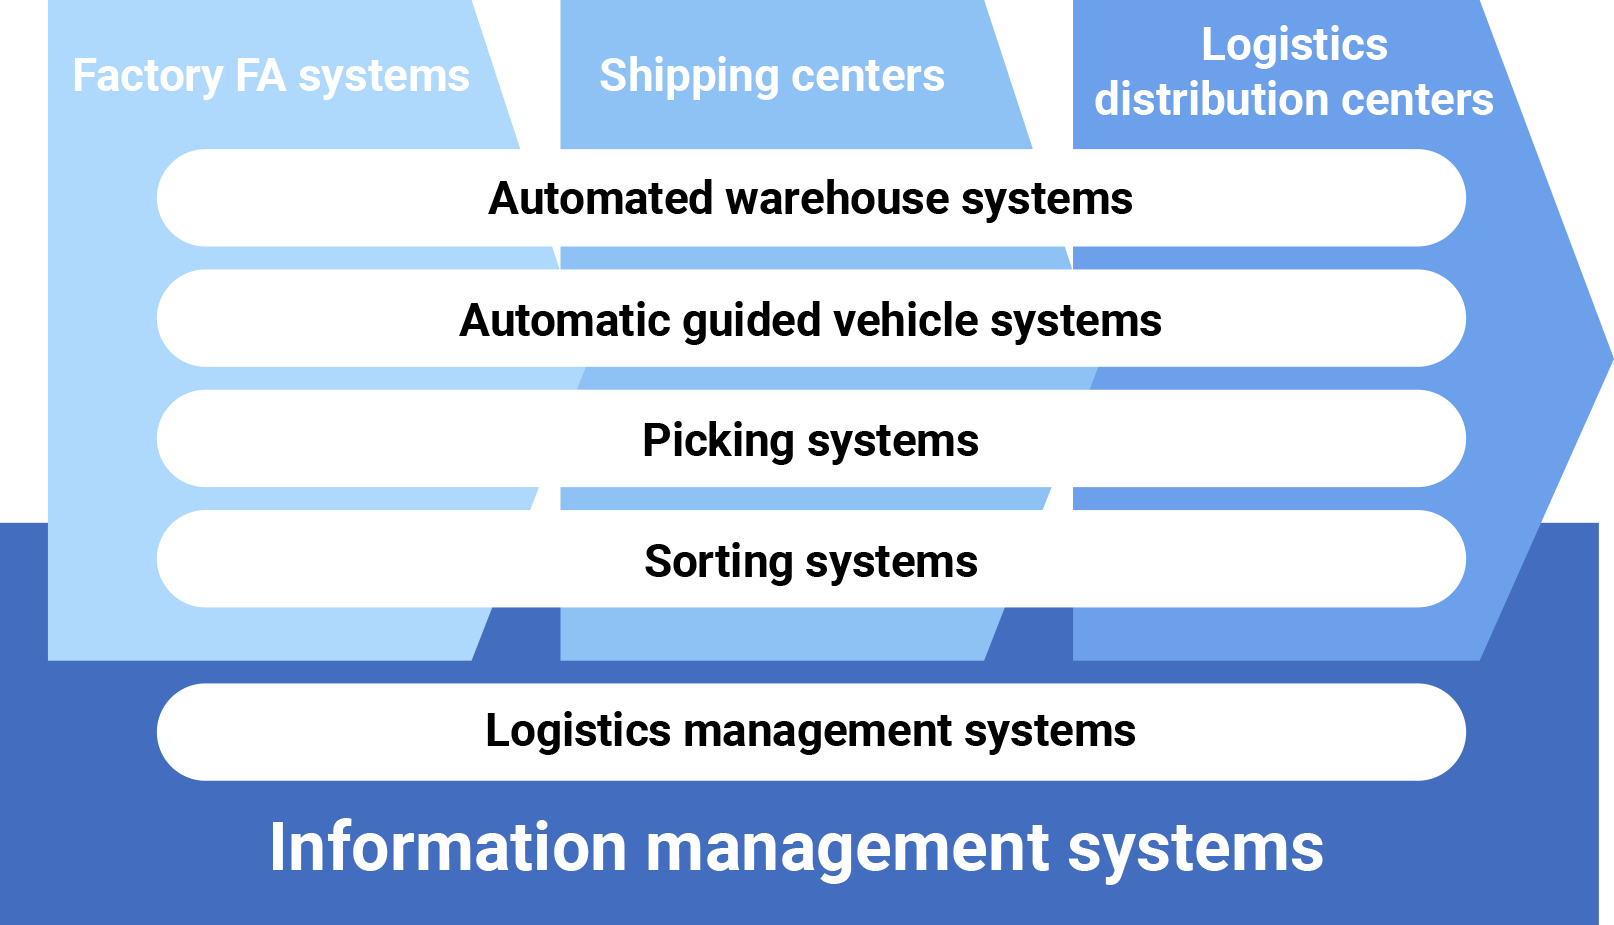 Logistics support for wide range of businesses and industries, from factory FA systems to shipping/distribution centers